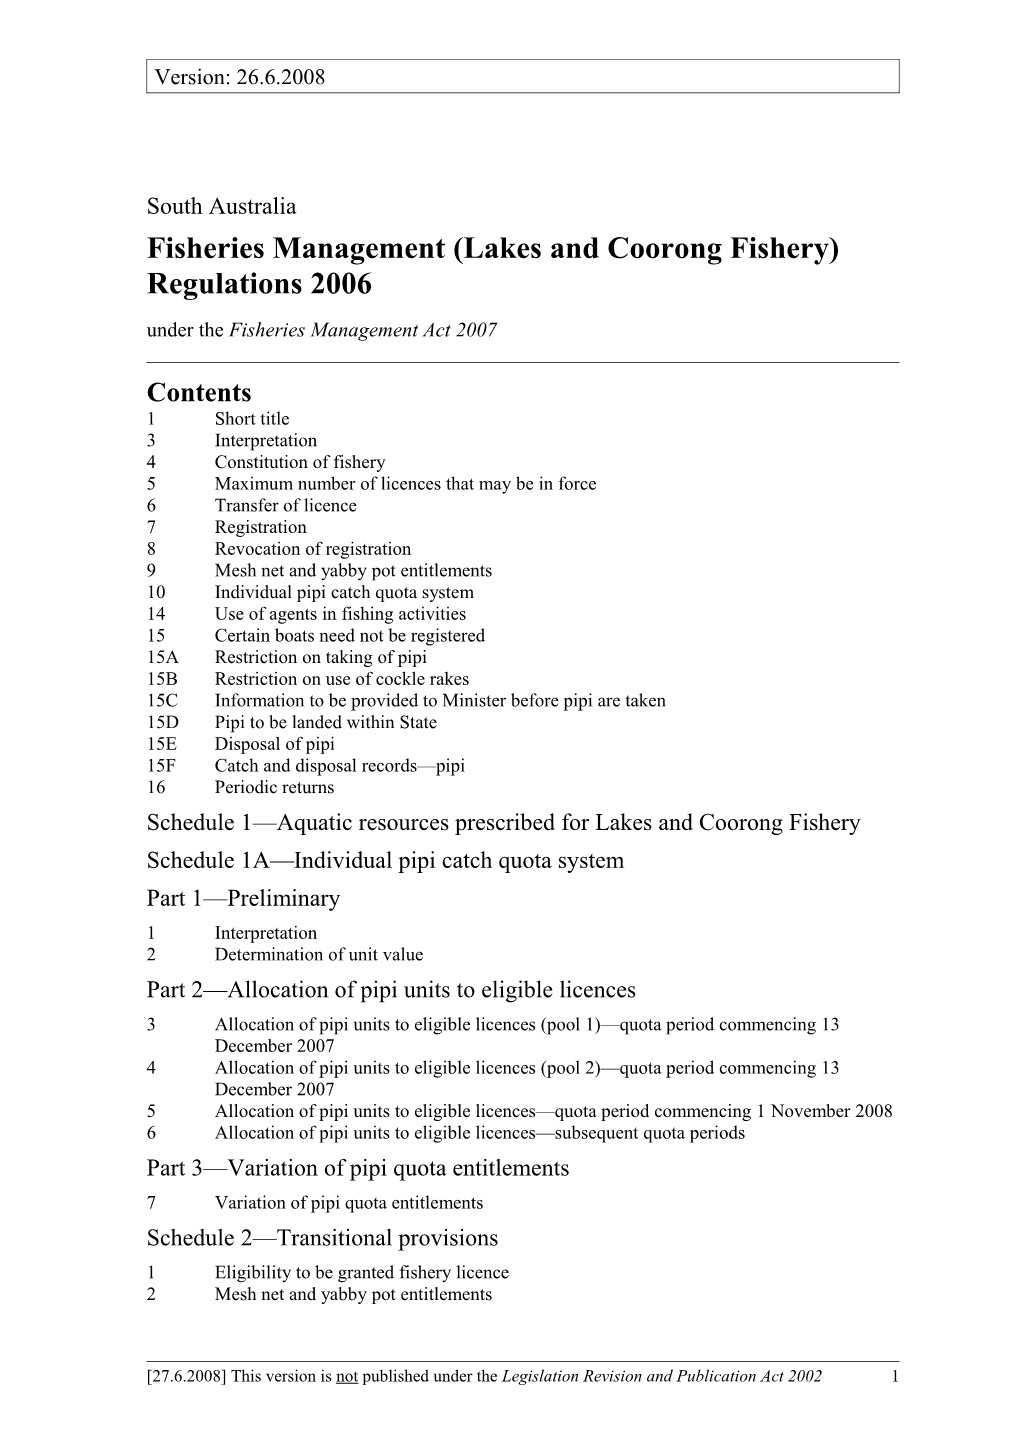 Fisheries Management (Lakes and Coorong Fishery) Regulations2006